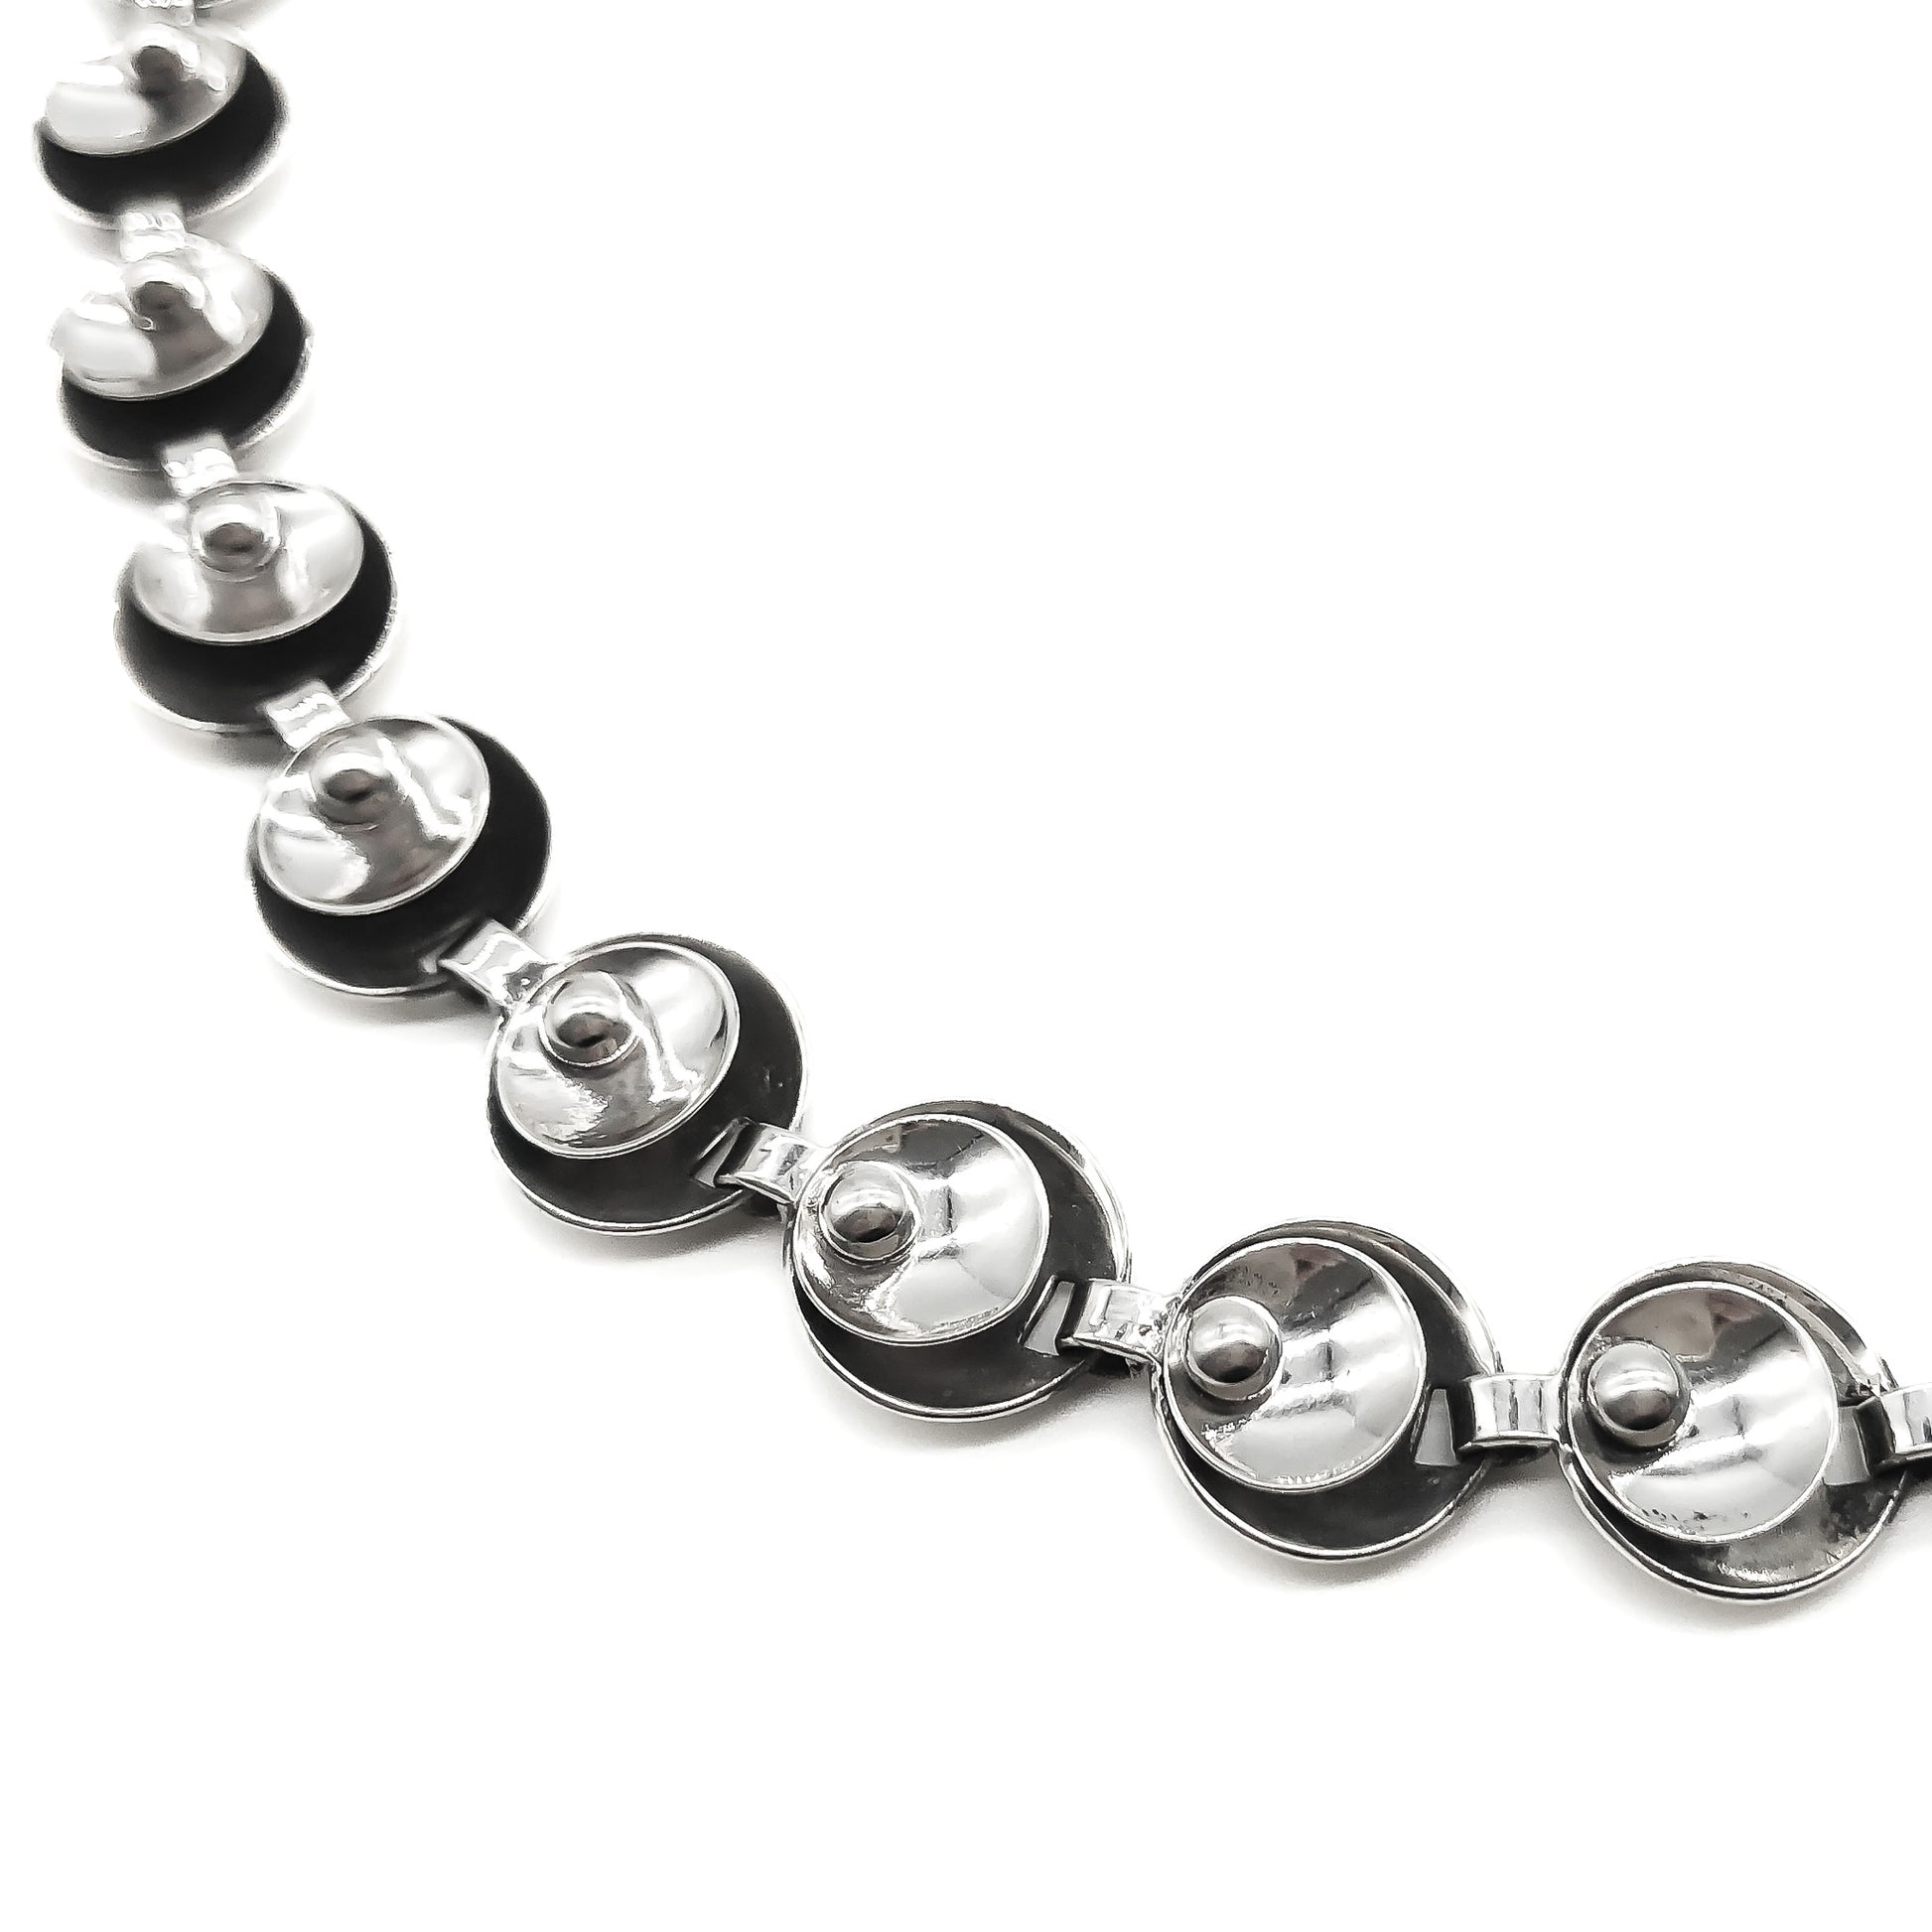 Silver 1940’s Scandinavian necklace with round three-dimensional links. 